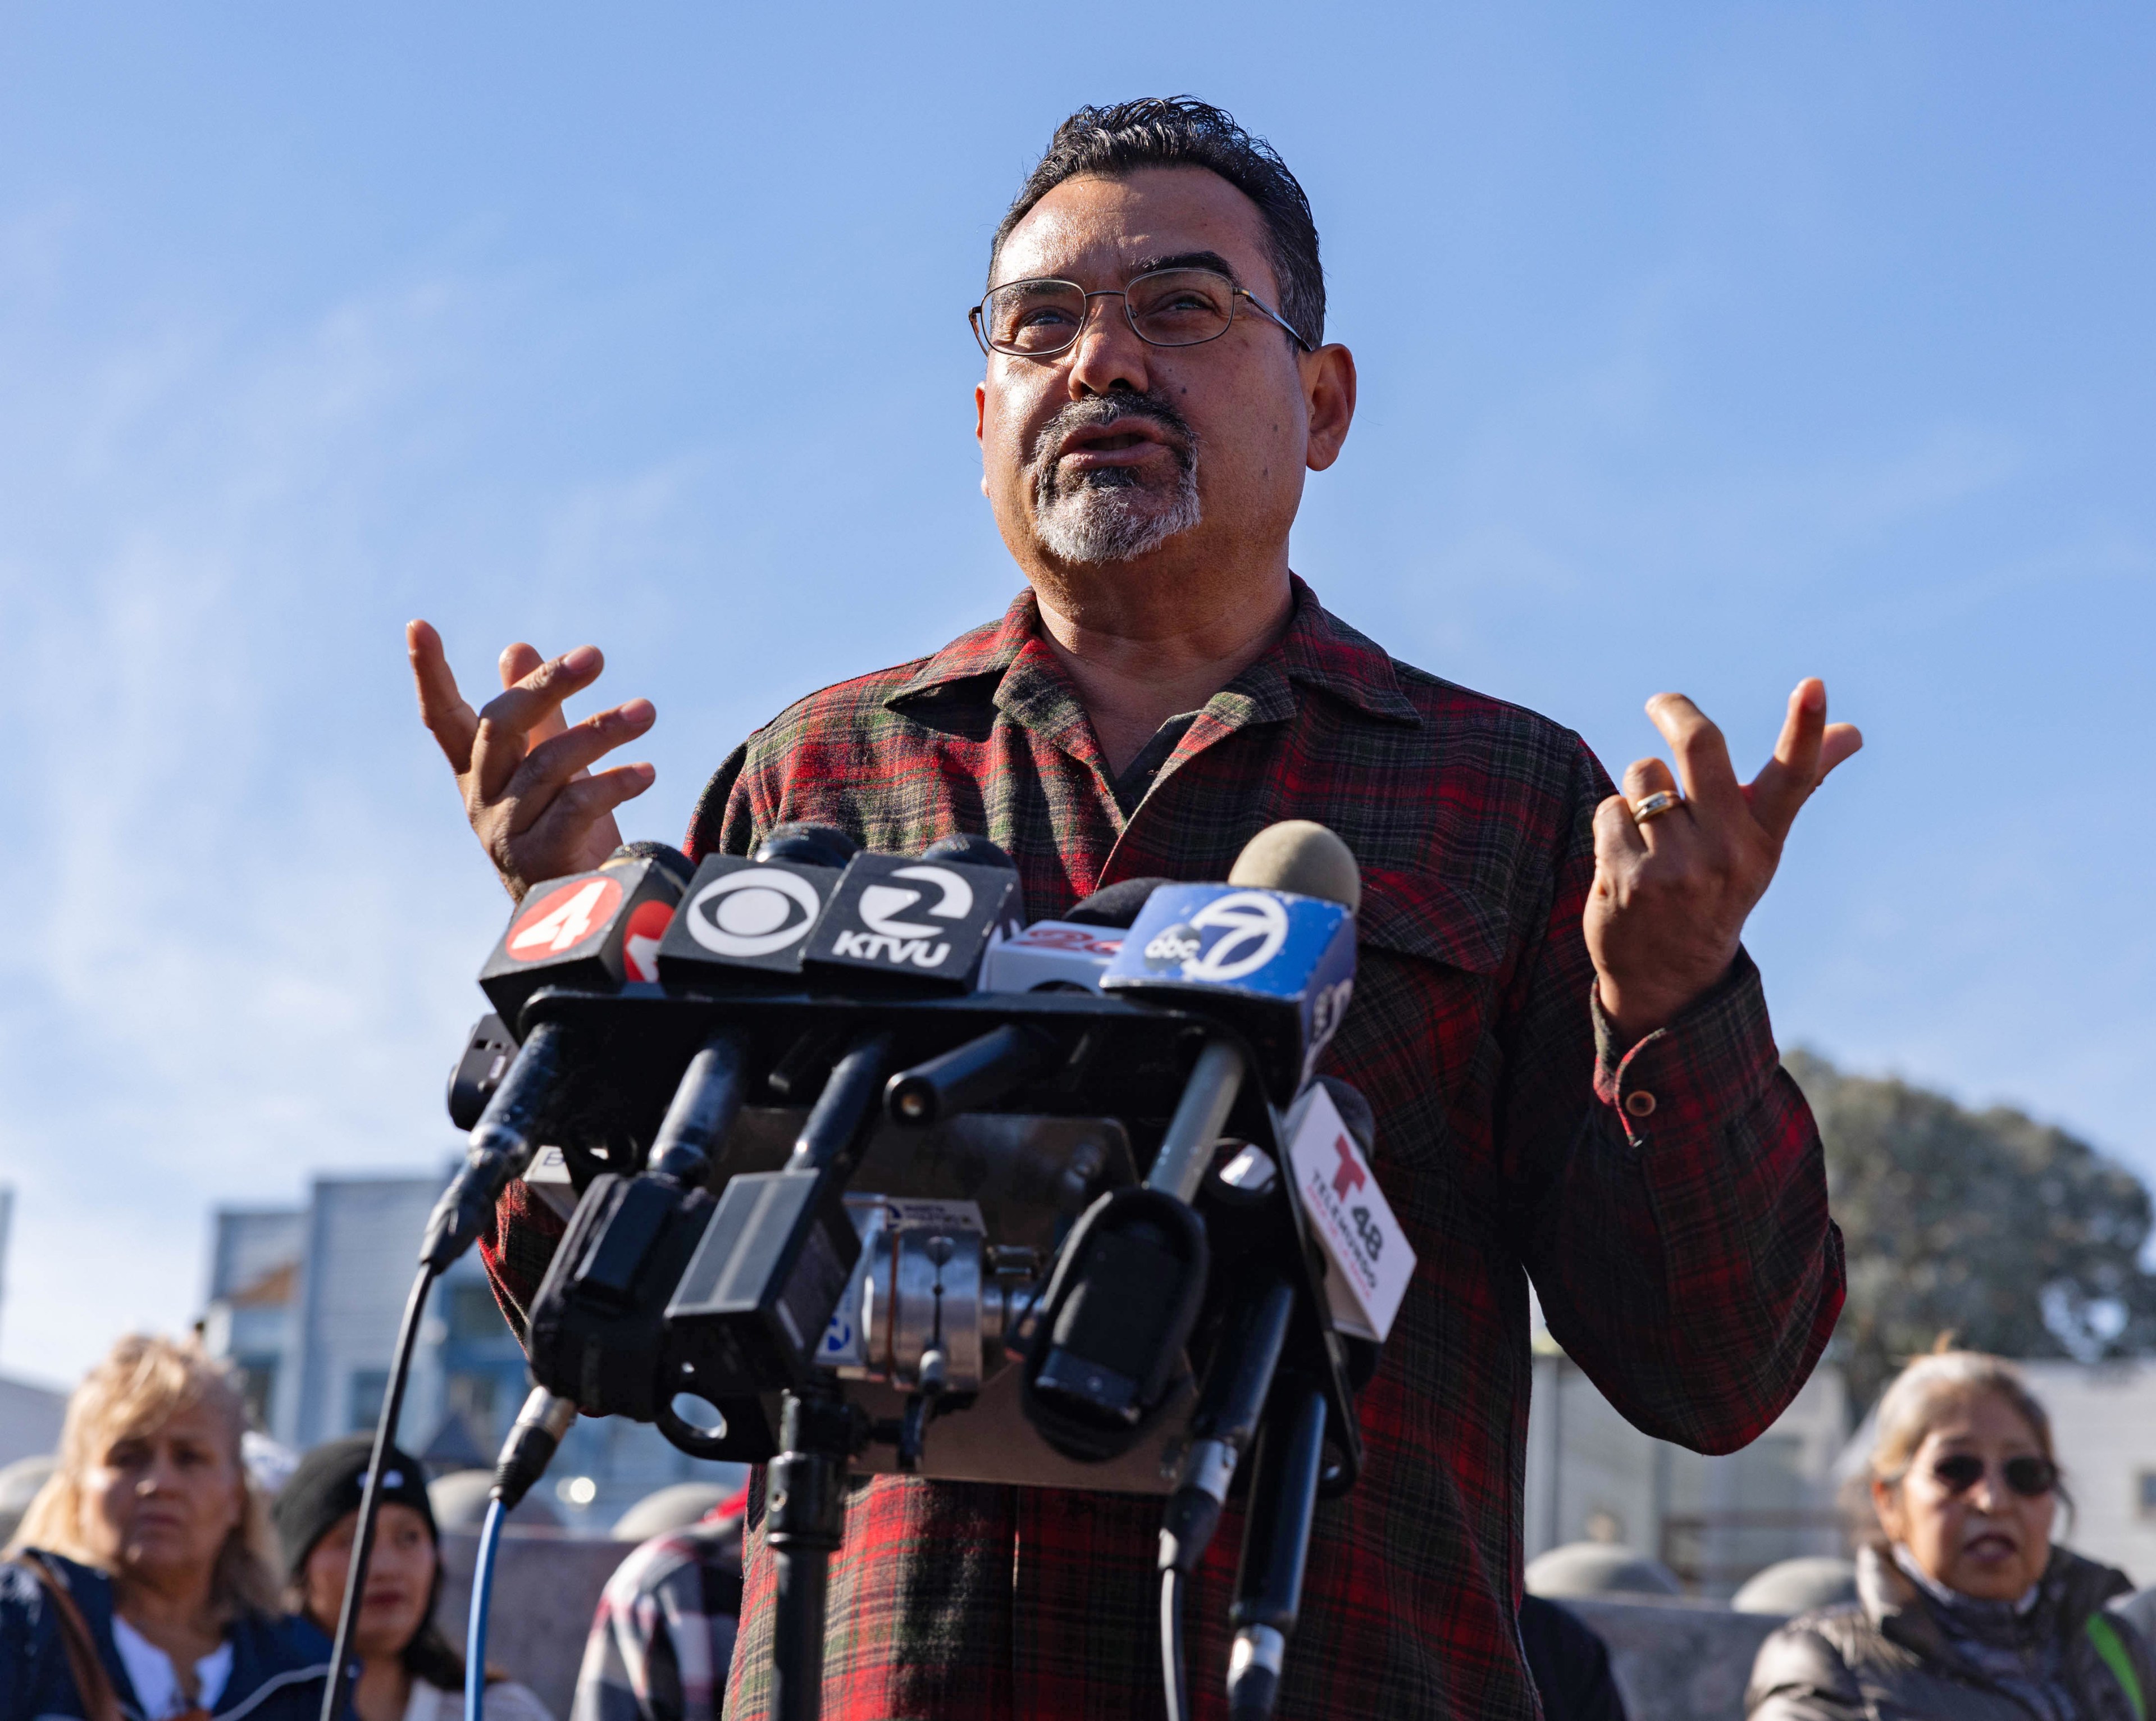 Rodrigo Lopez in a plaid shirt speaks passionately into multiple microphones at a press conference or public event, with people standing behind him against a clear blue sky.